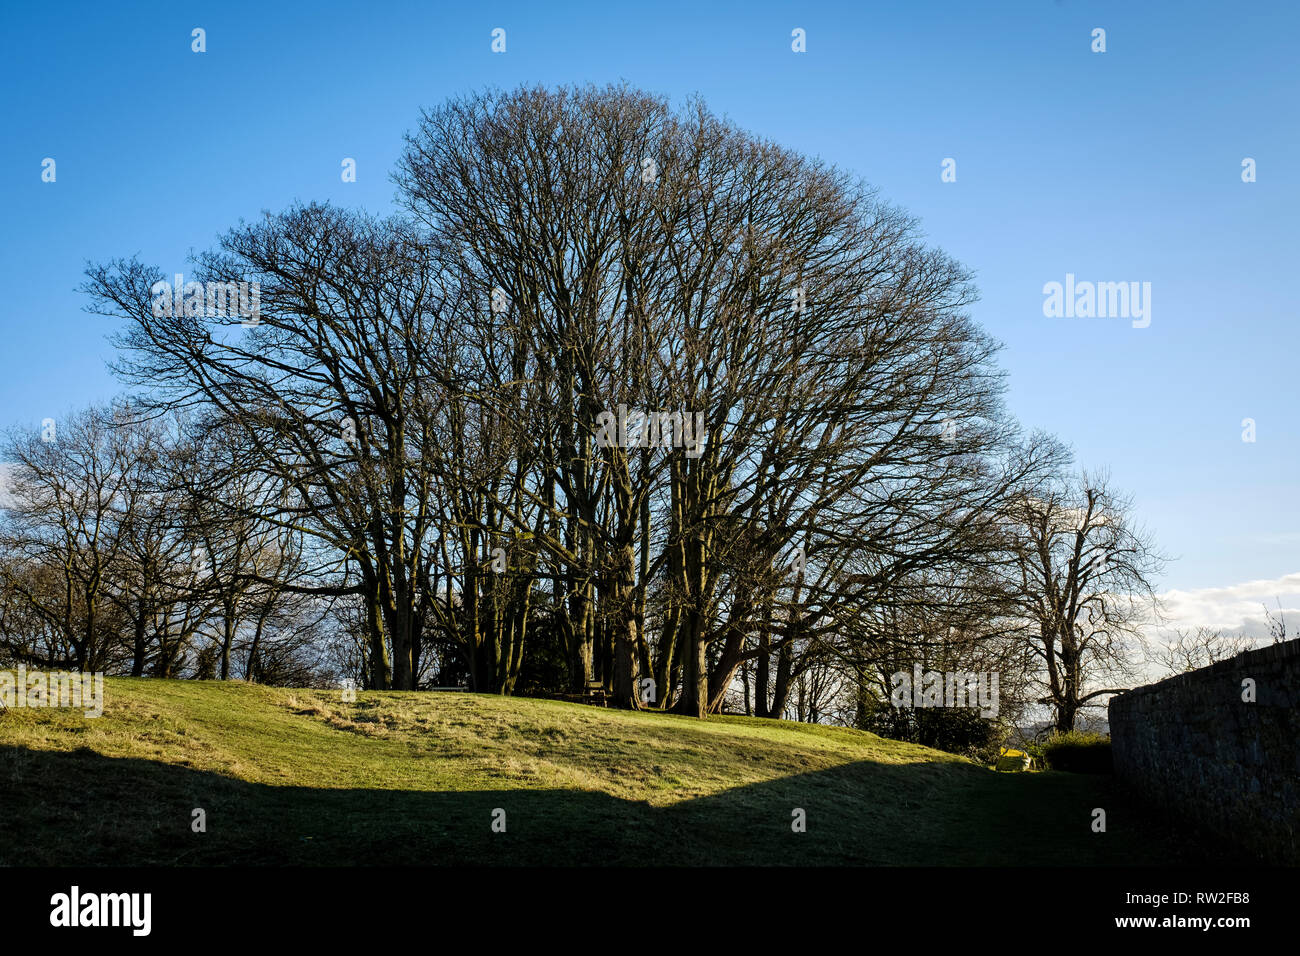 GROUP OF BEECH TREES IN WINTER Stock Photo